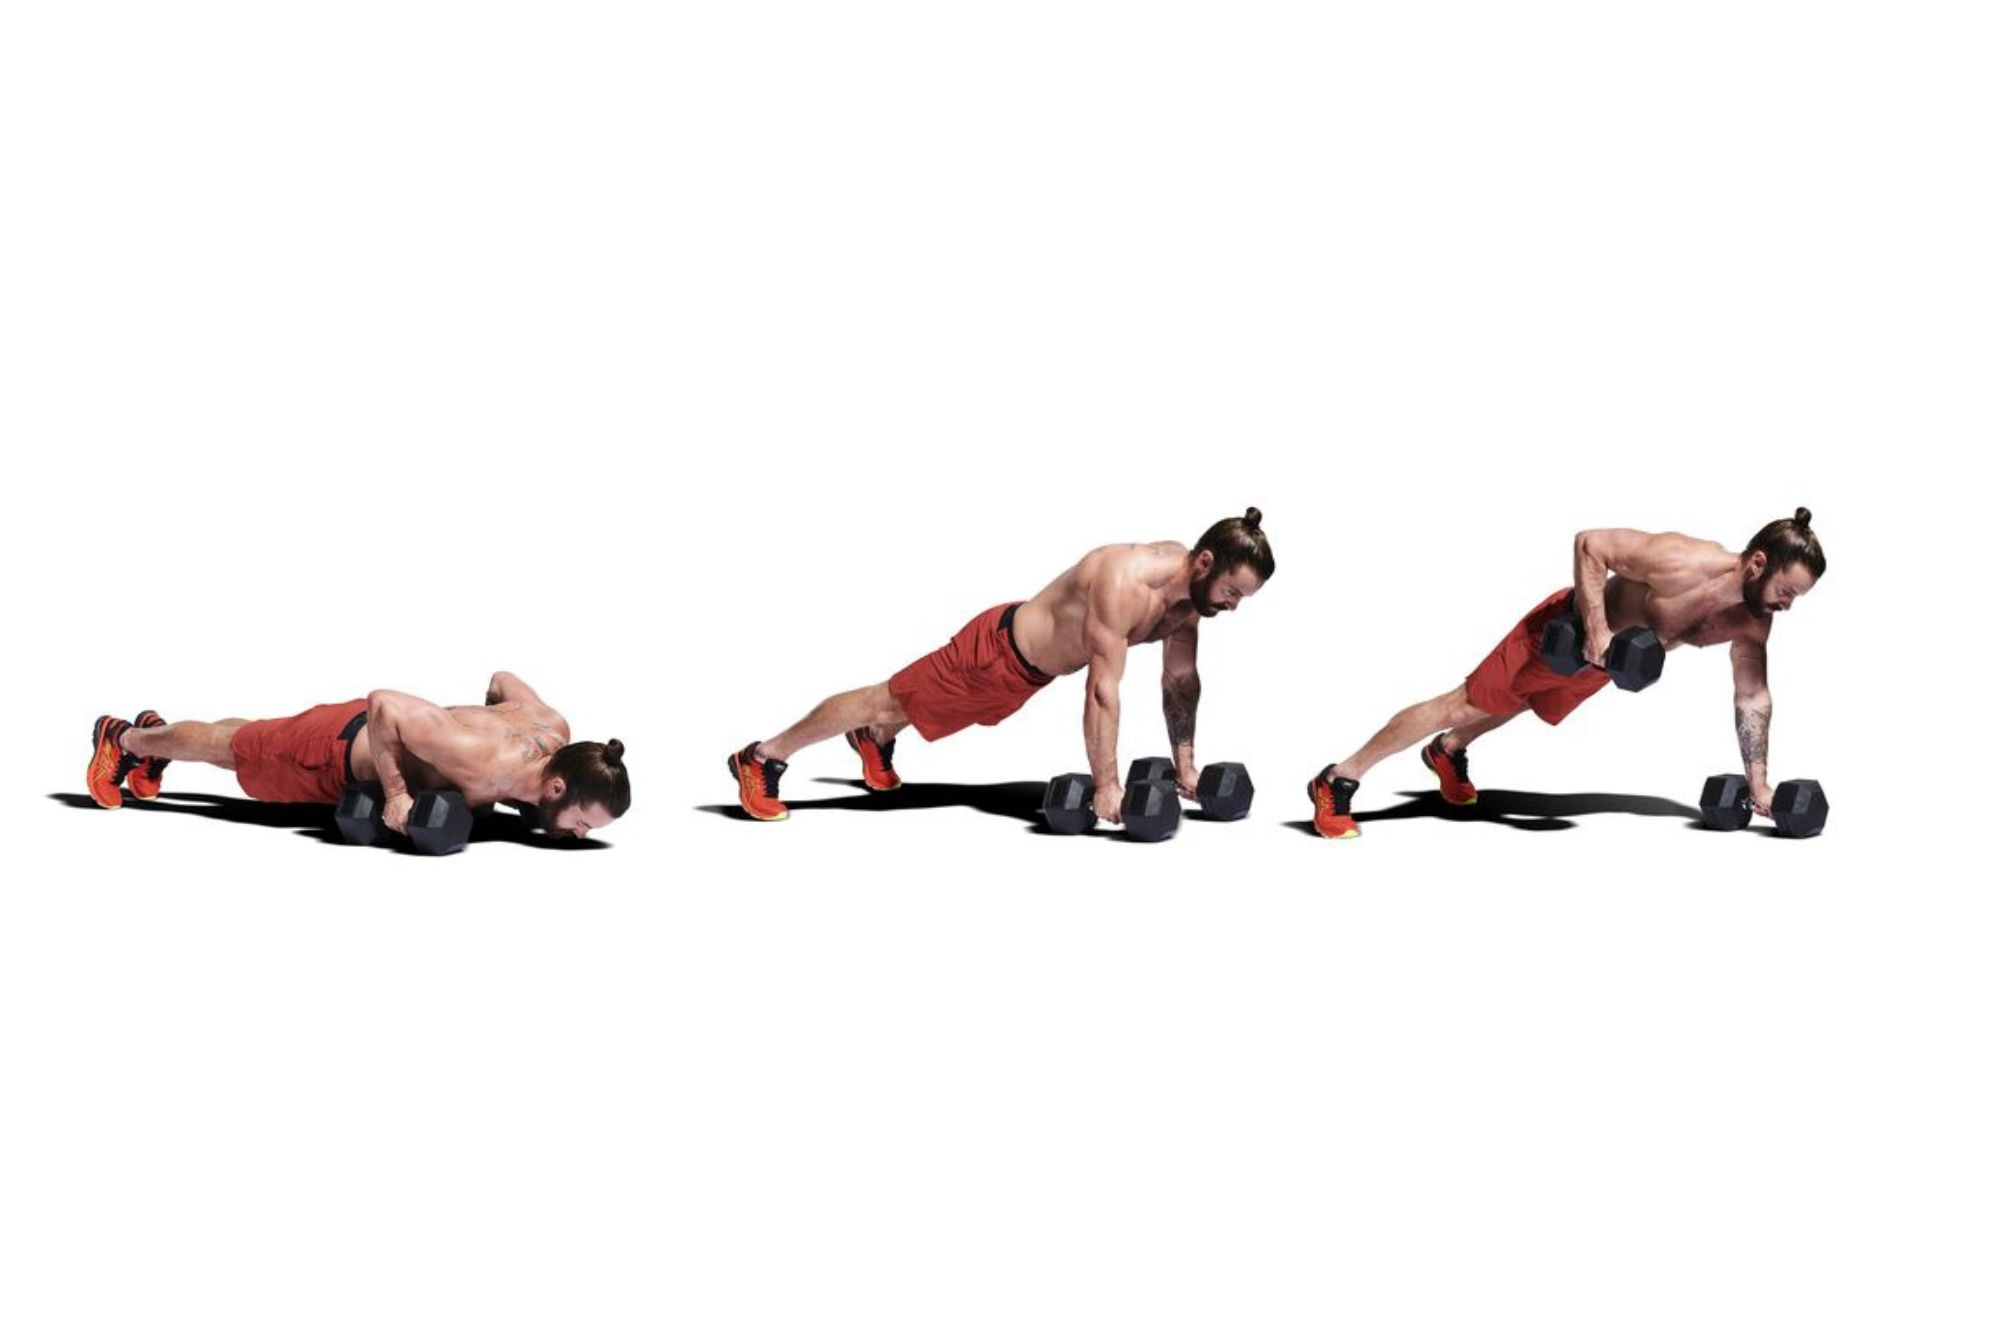 Press Up Vs Push Up: What Is the Difference? 